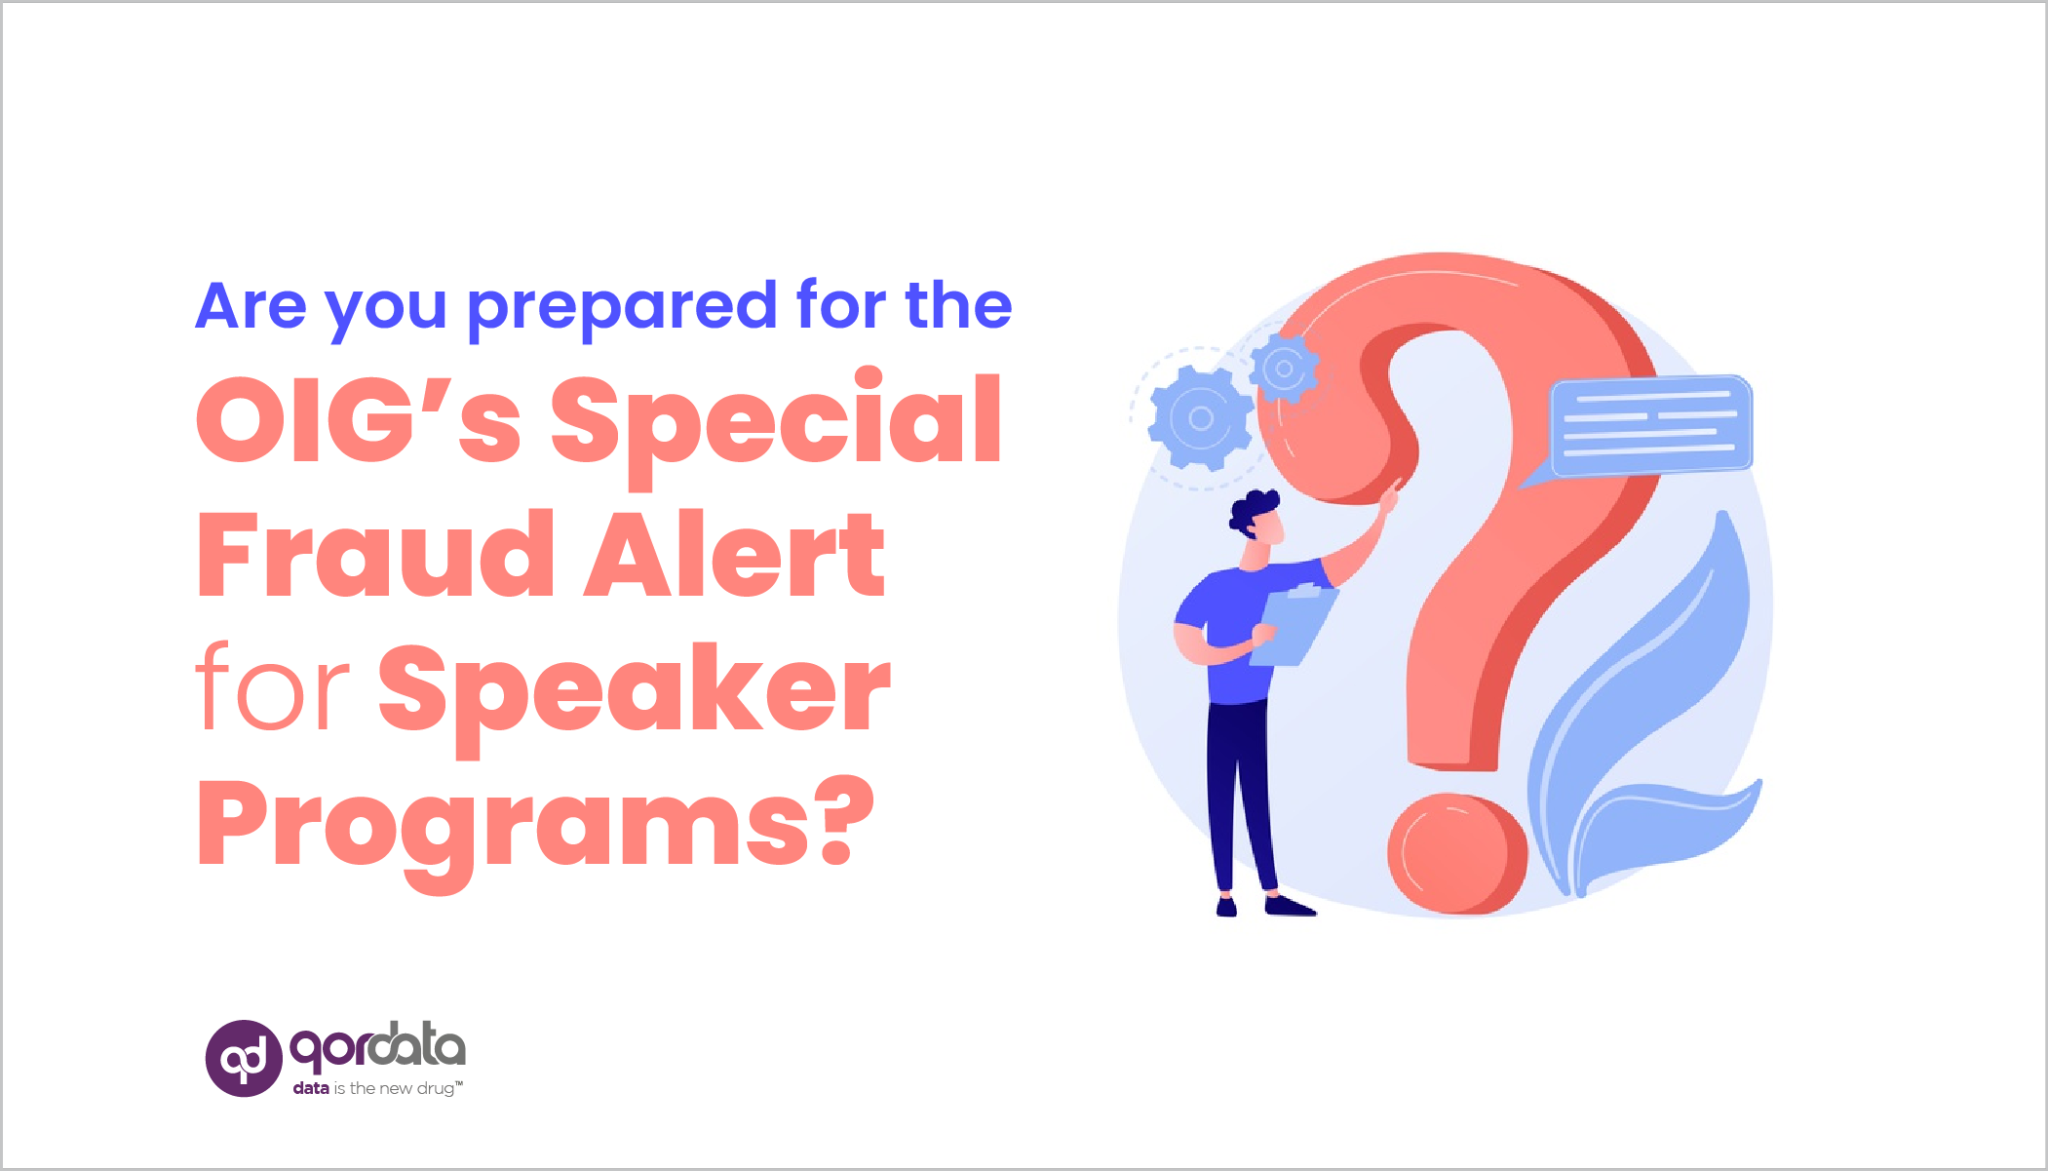 Are you prepared for the OIG’s Special Fraud Alert for Speaker Programs?